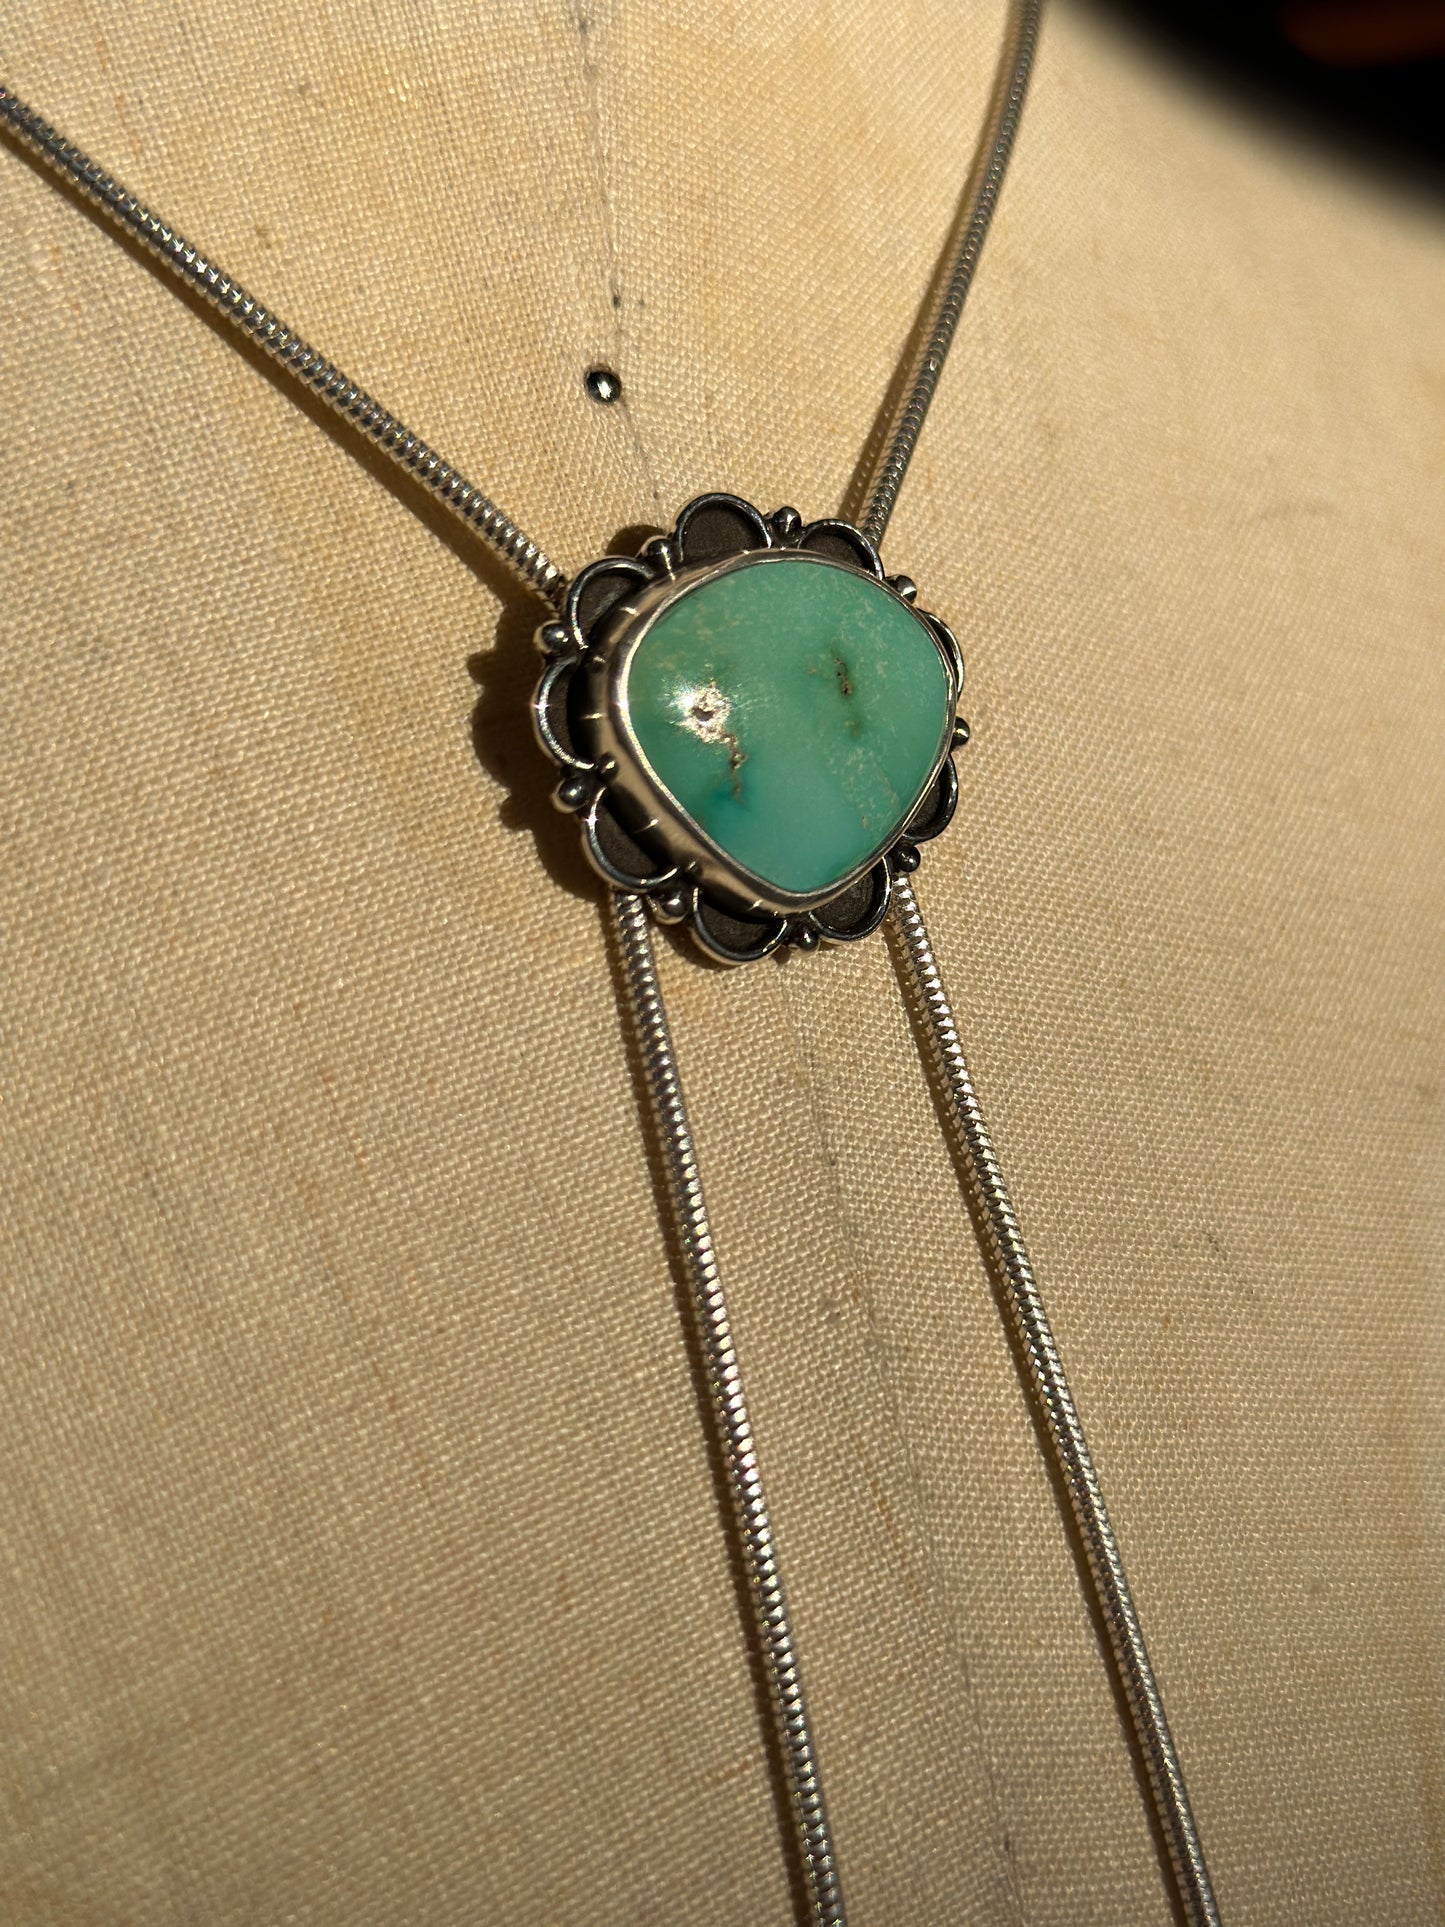 Sterling Silver Bolo Tie Necklace with Turquoise